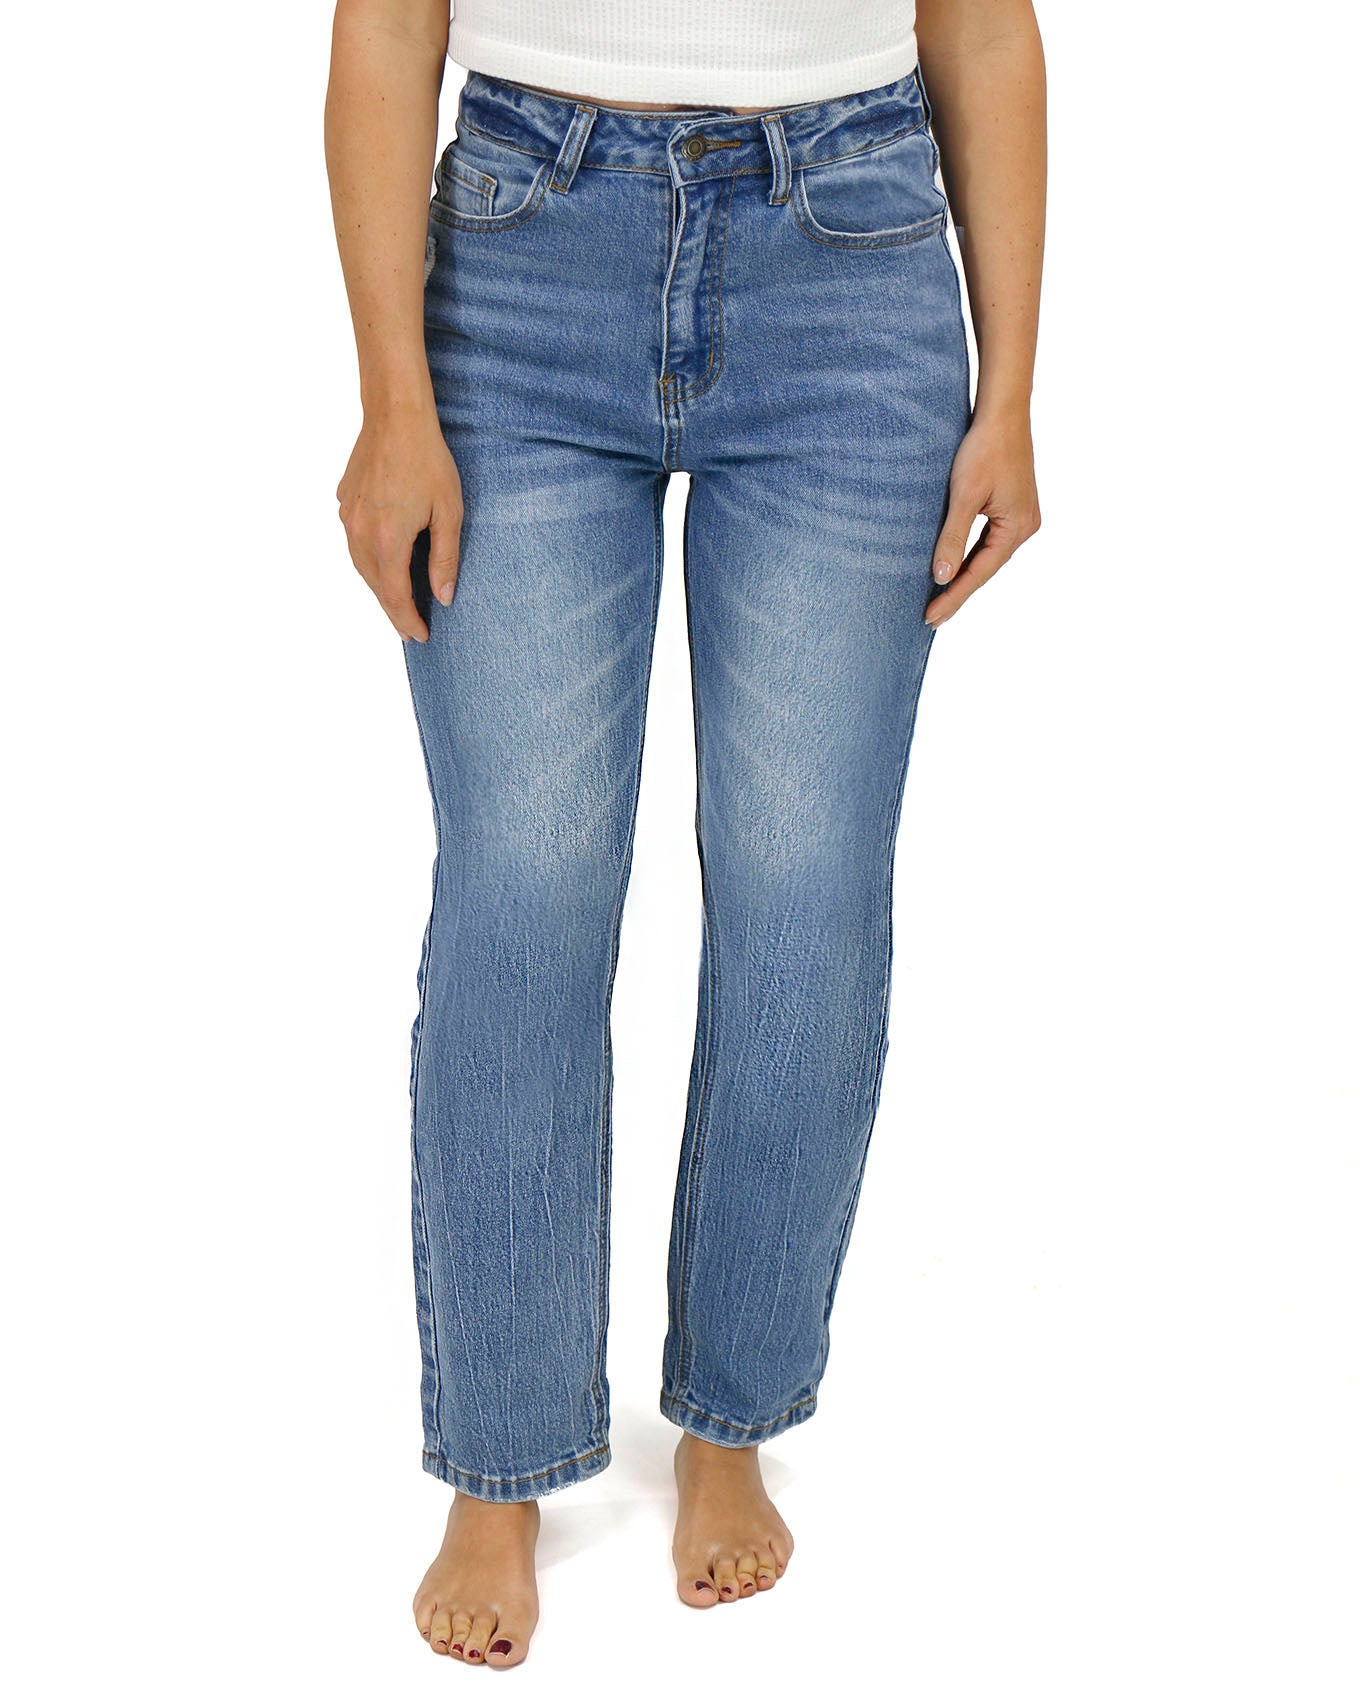 High-Rise Girlfriend Jeans in Non Distressed Mid-Wash